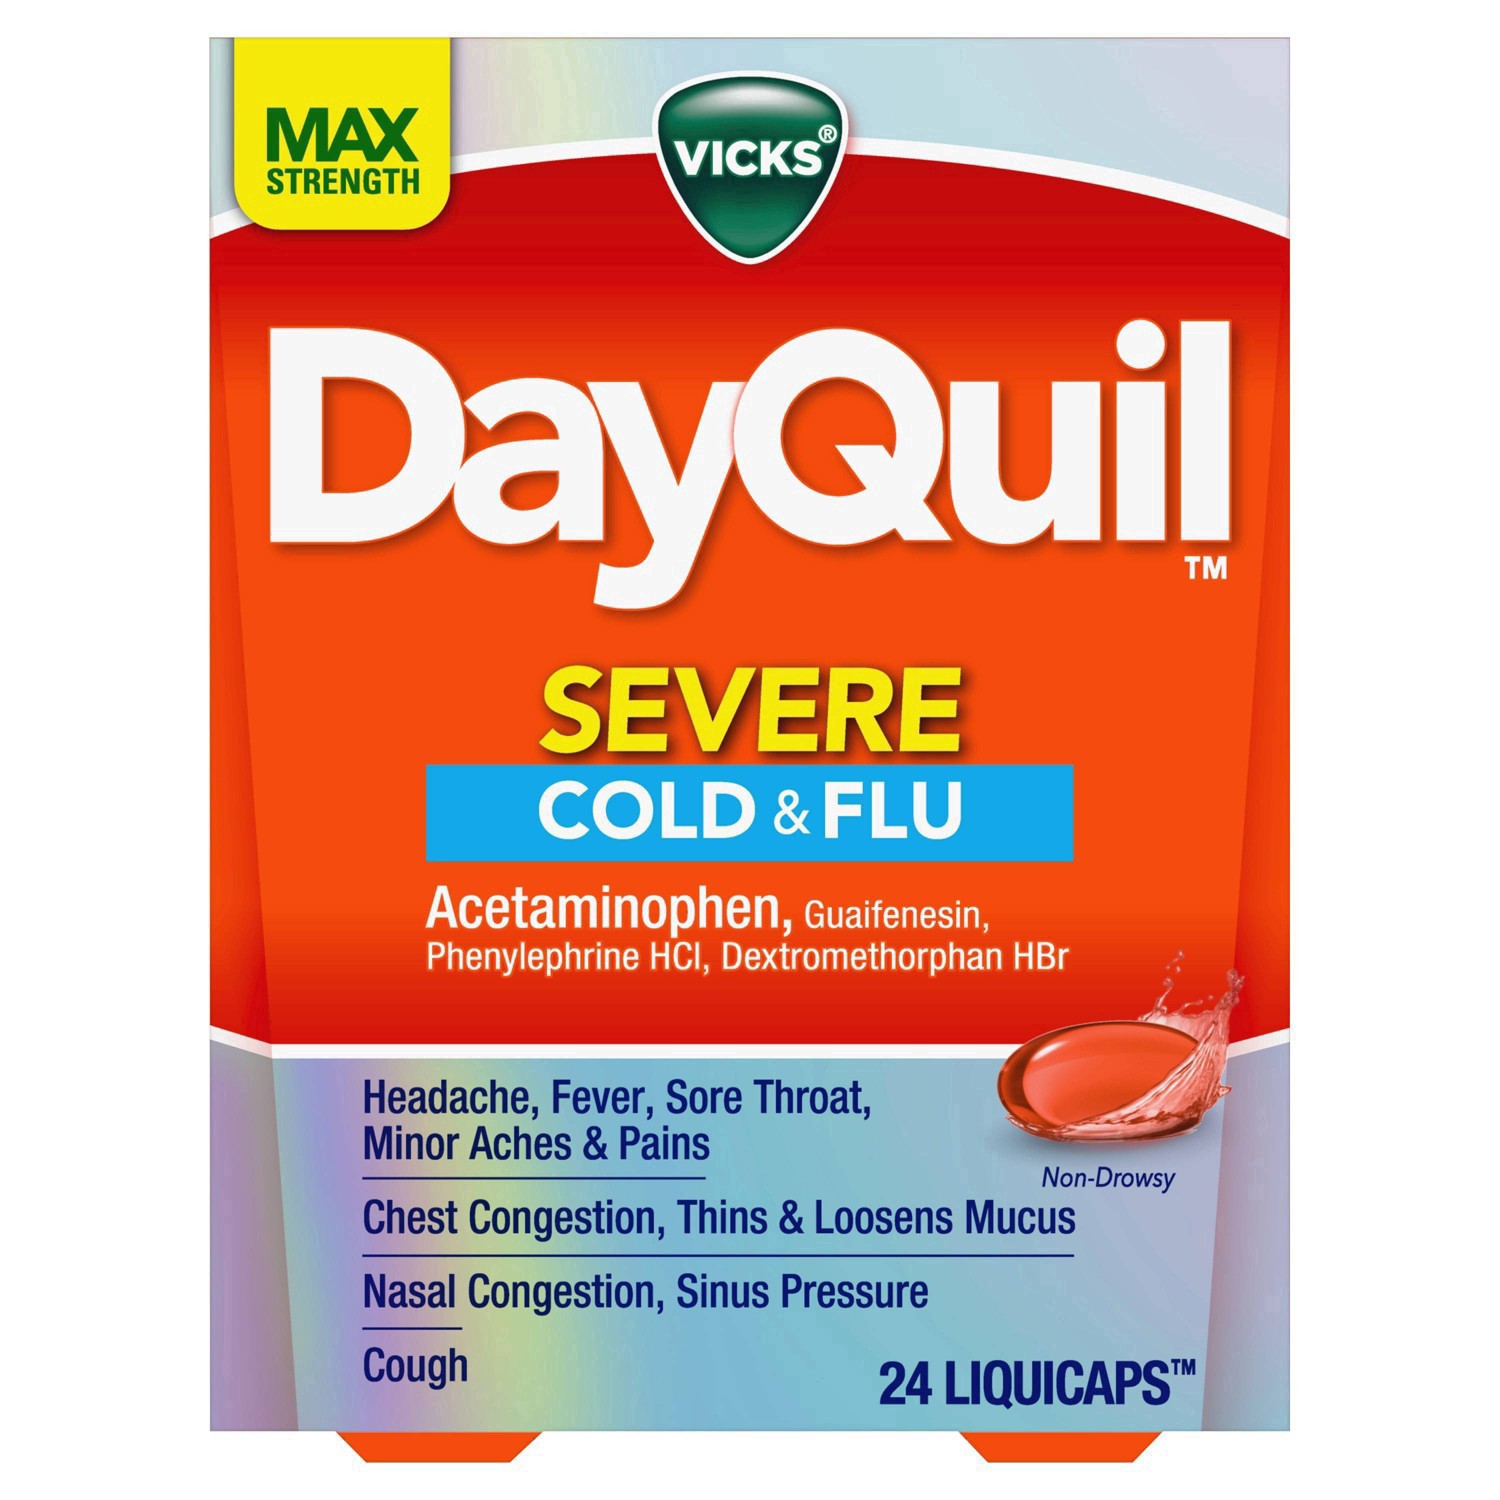 slide 36 of 46, Vicks DayQuil SEVERE Cold & Flu Medicine, Maximum Strength 9-Symptom Non-Drowsy Daytime Relief for Headache, Fever, Sore Throat, Minor Aches and Pains, Chest Congestion, Stuffy Nose, Nasal Congestion, Sinus Pressure, and Cough, 24 Liquicaps, 24 ct